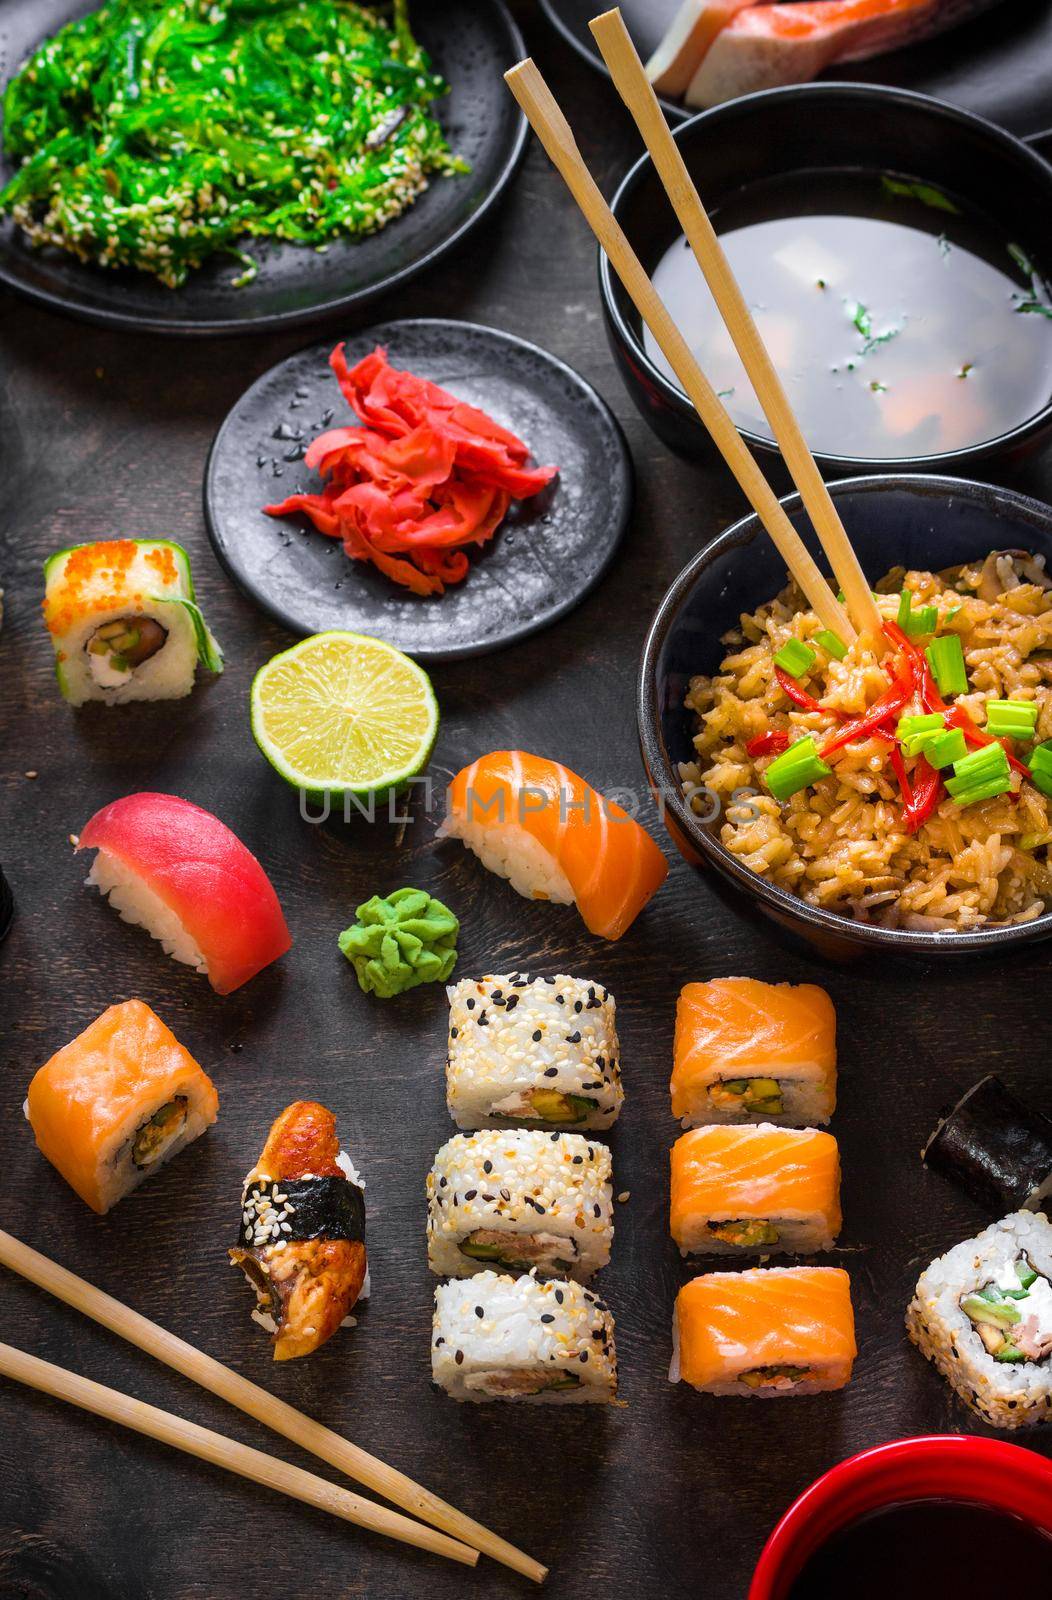 Table served with sushi and traditional japanese food on dark background. Sushi rolls, hiyashi wakame, miso soup, ramen, fried rice with vegetables, nigiri, soy sauce, сhopsticks. Japanese dishes set....